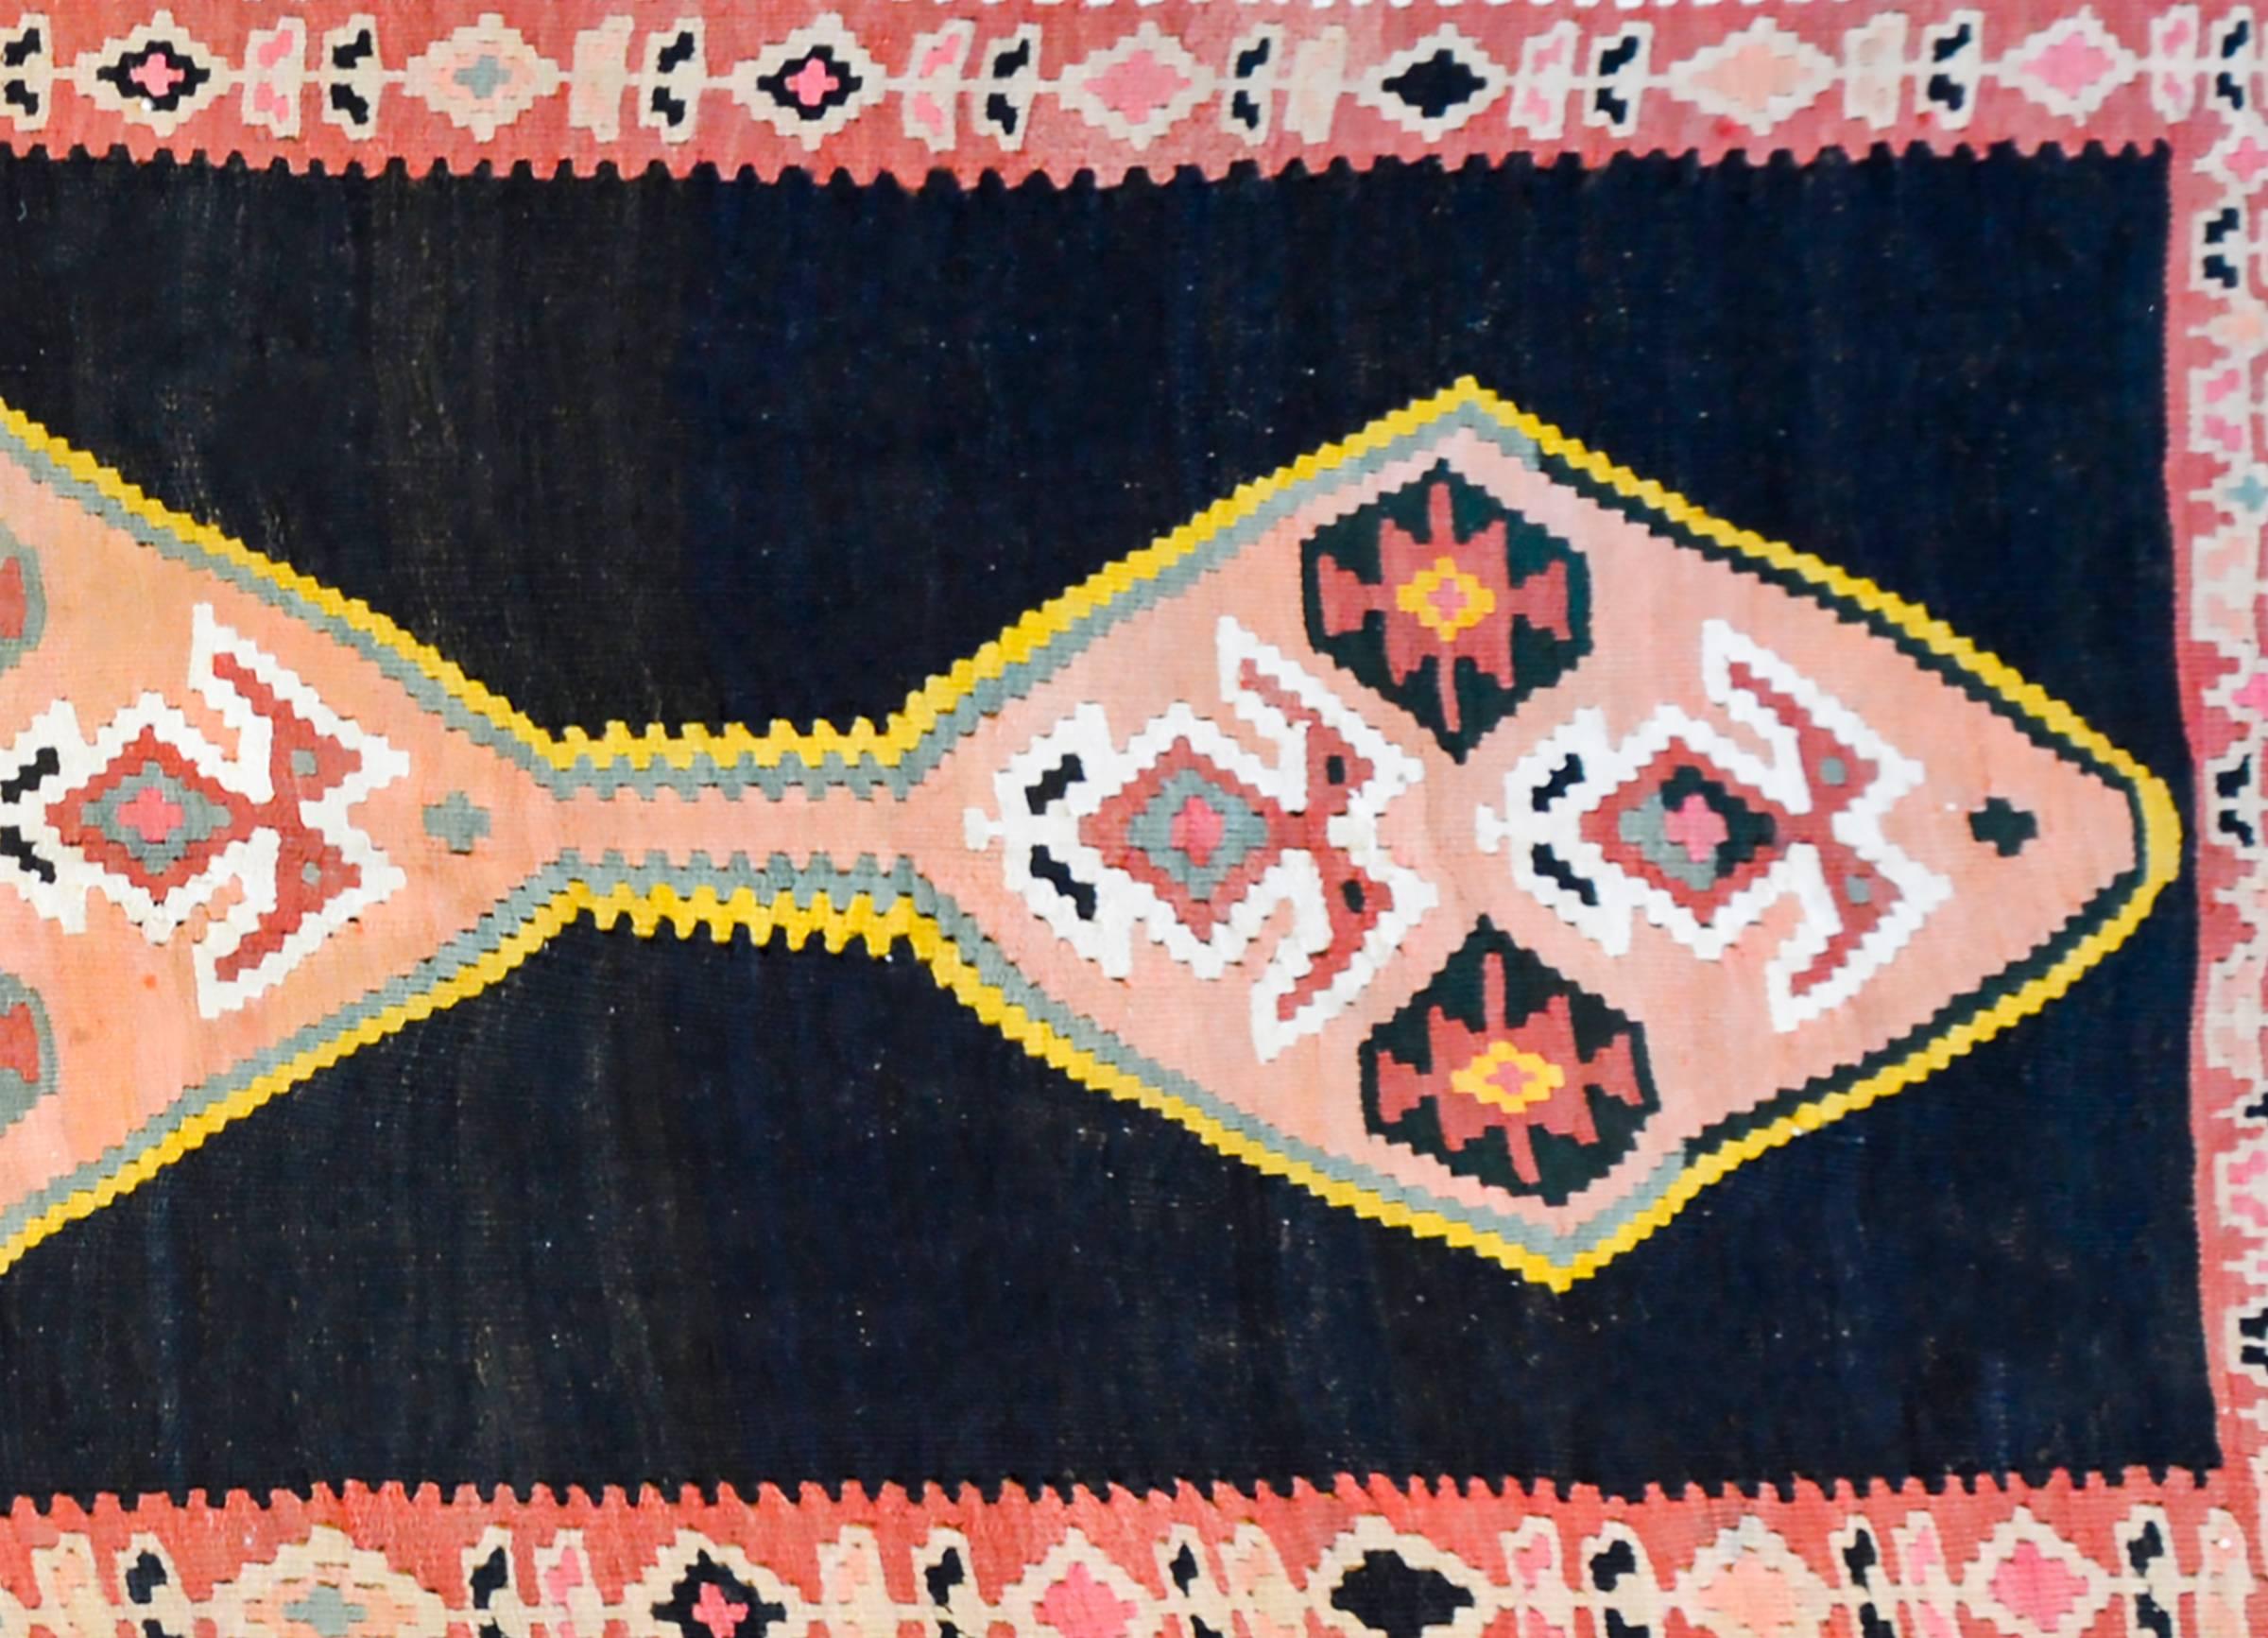 A wonderfully bold Late 20th century Persian Zanjan Kilim rug with three large diamond medallions each with stylized flowers, on an abrash orange background outlined by pale blue and gold stripes. The background is a deep, almost black, indigo. The